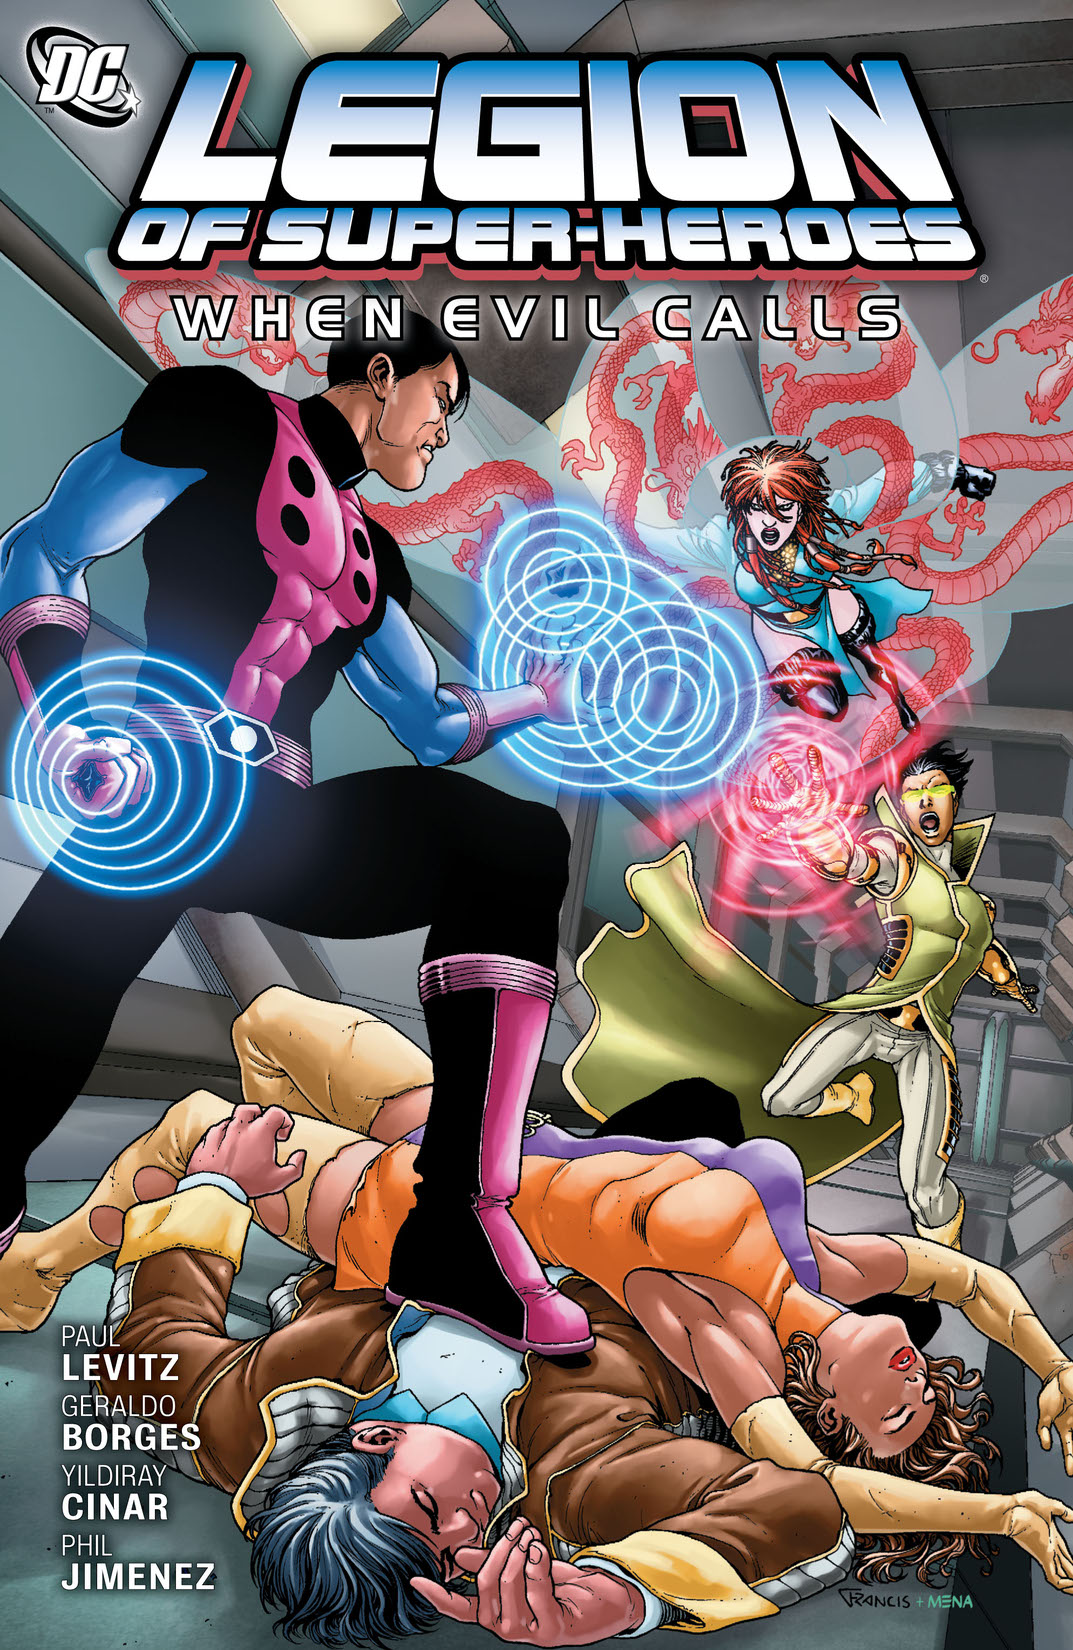 Legion of Super-Heroes: When Evil Calls preview images